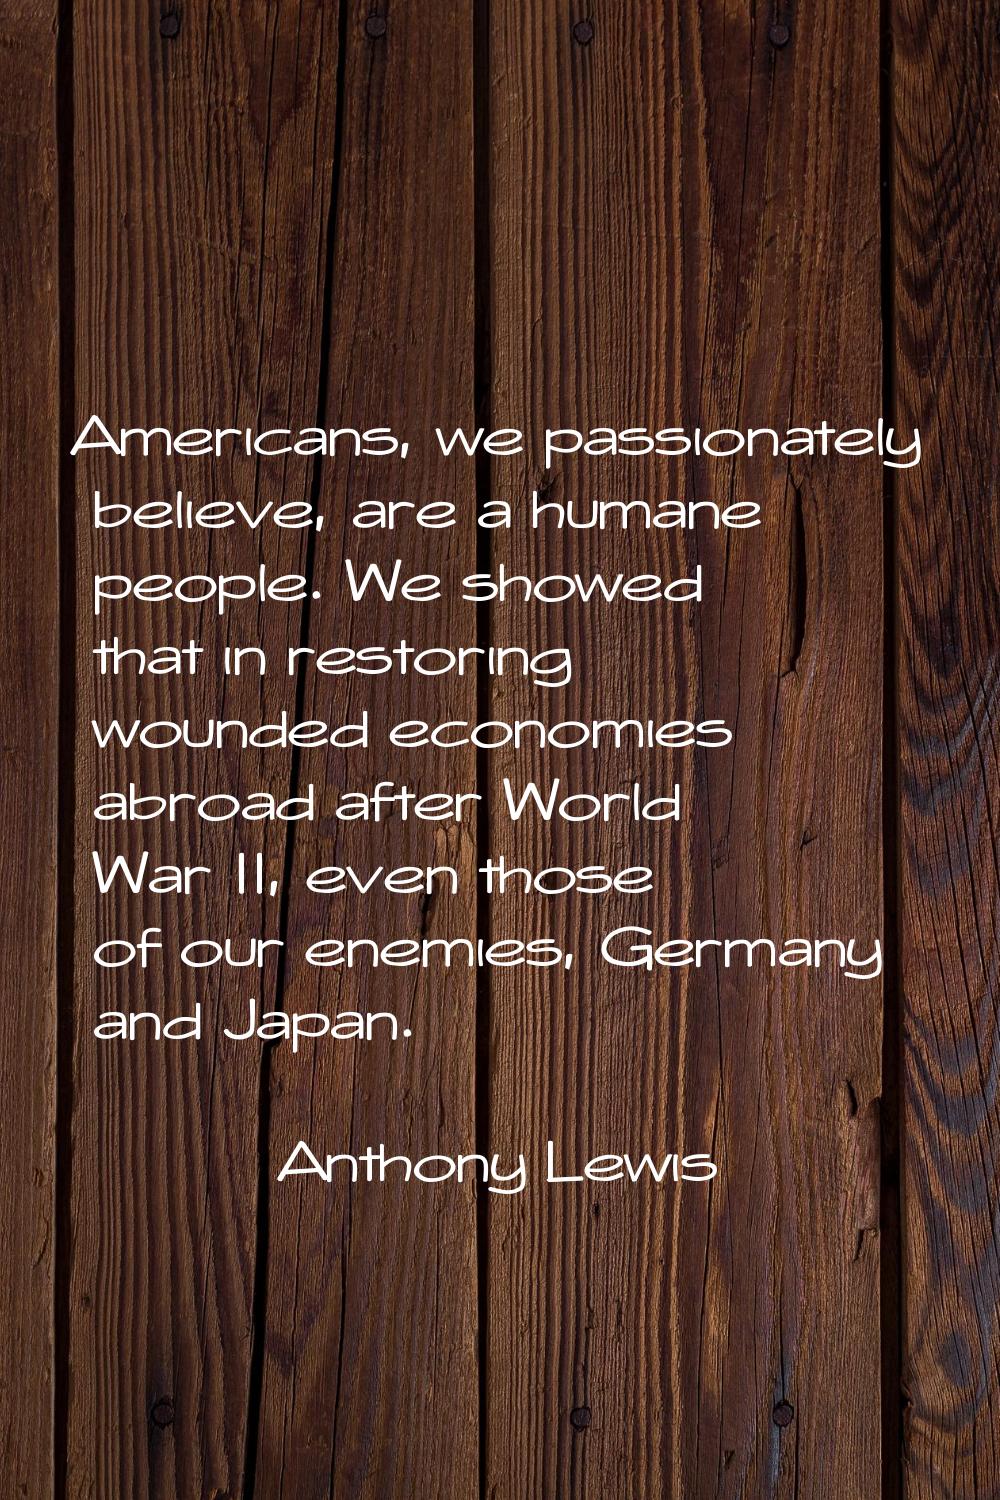 Americans, we passionately believe, are a humane people. We showed that in restoring wounded econom